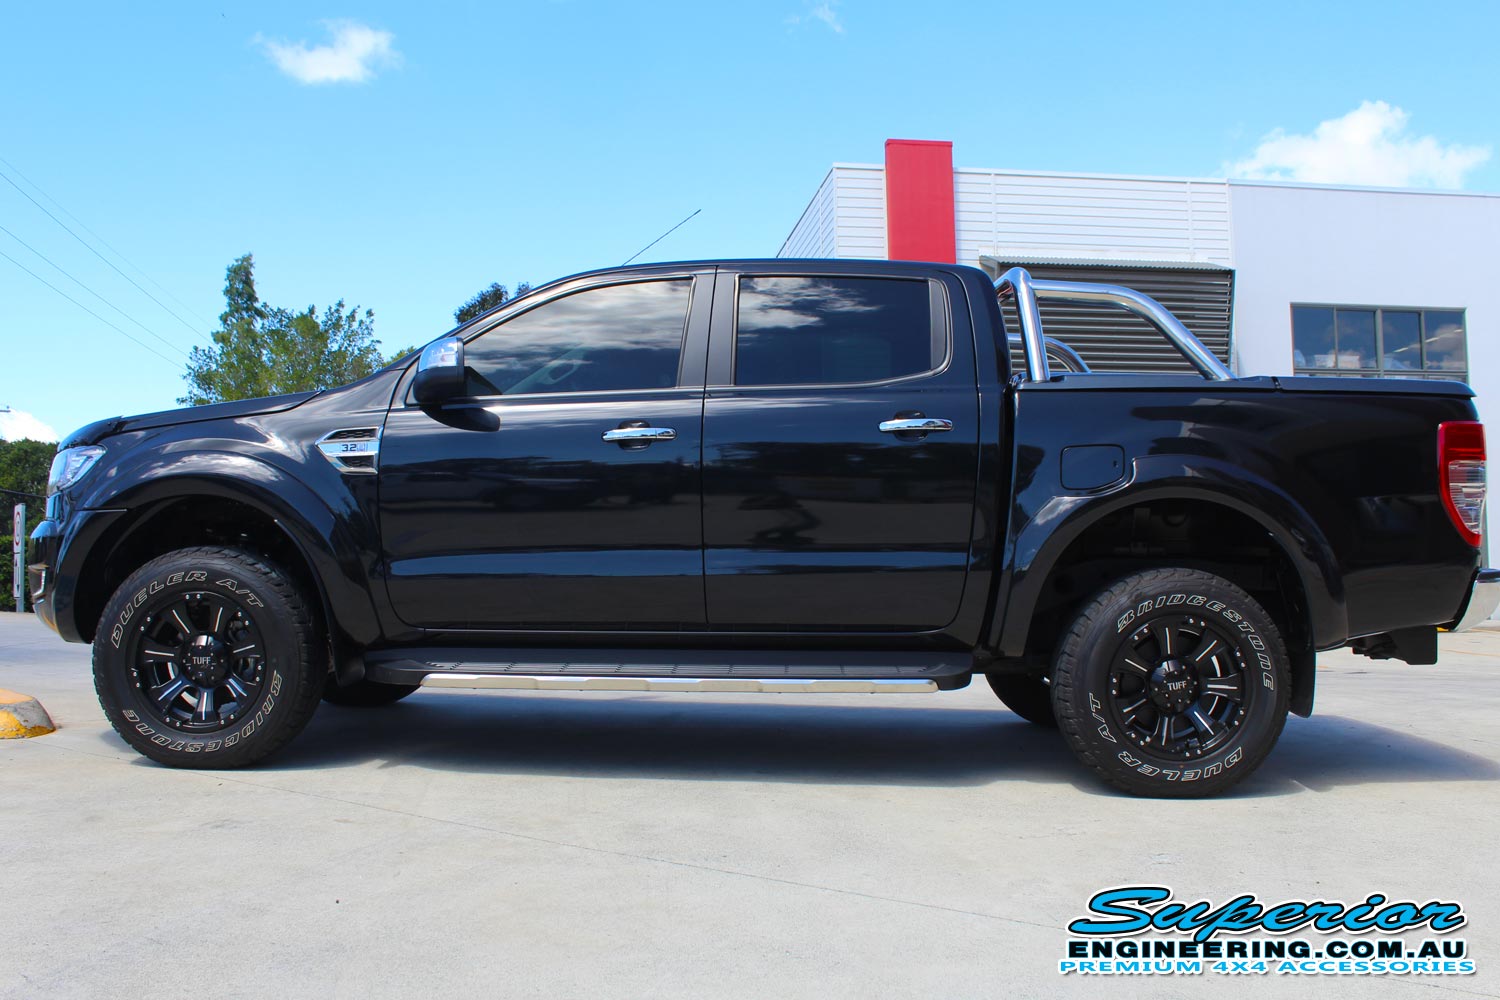 Left side view of a black PX Ford Ranger (Dual Cab) fitted with a 40mm Ironman 4x4 lift kit out the front of the Deception Bay 4WD retail store